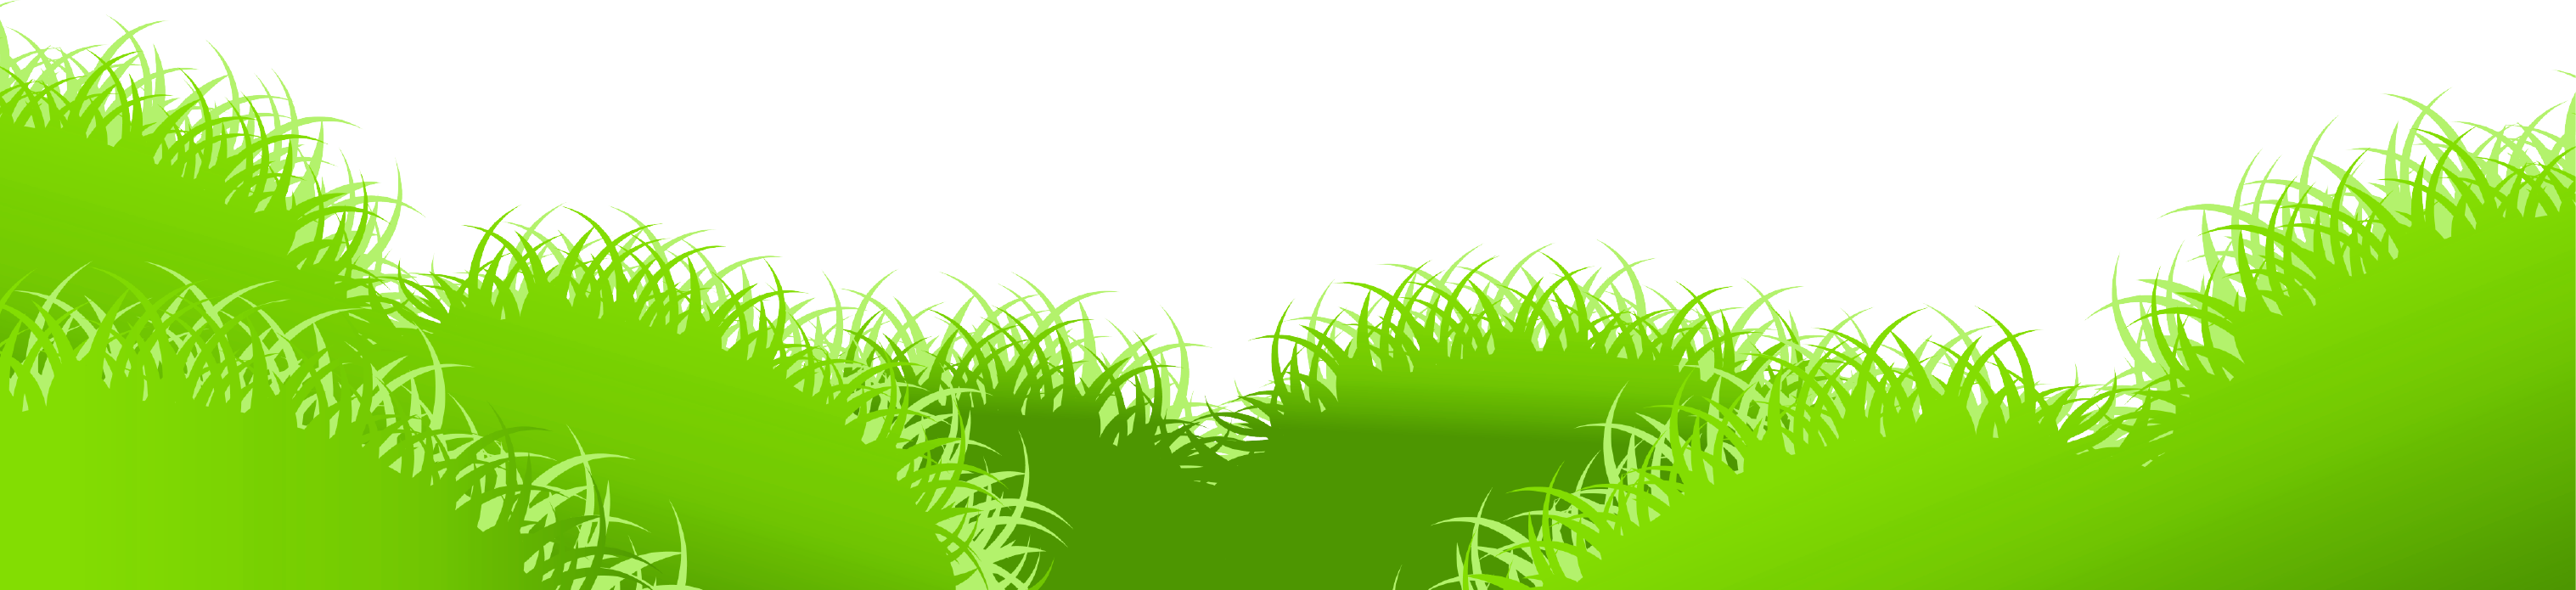 Free Grass Clip Art Pictures.